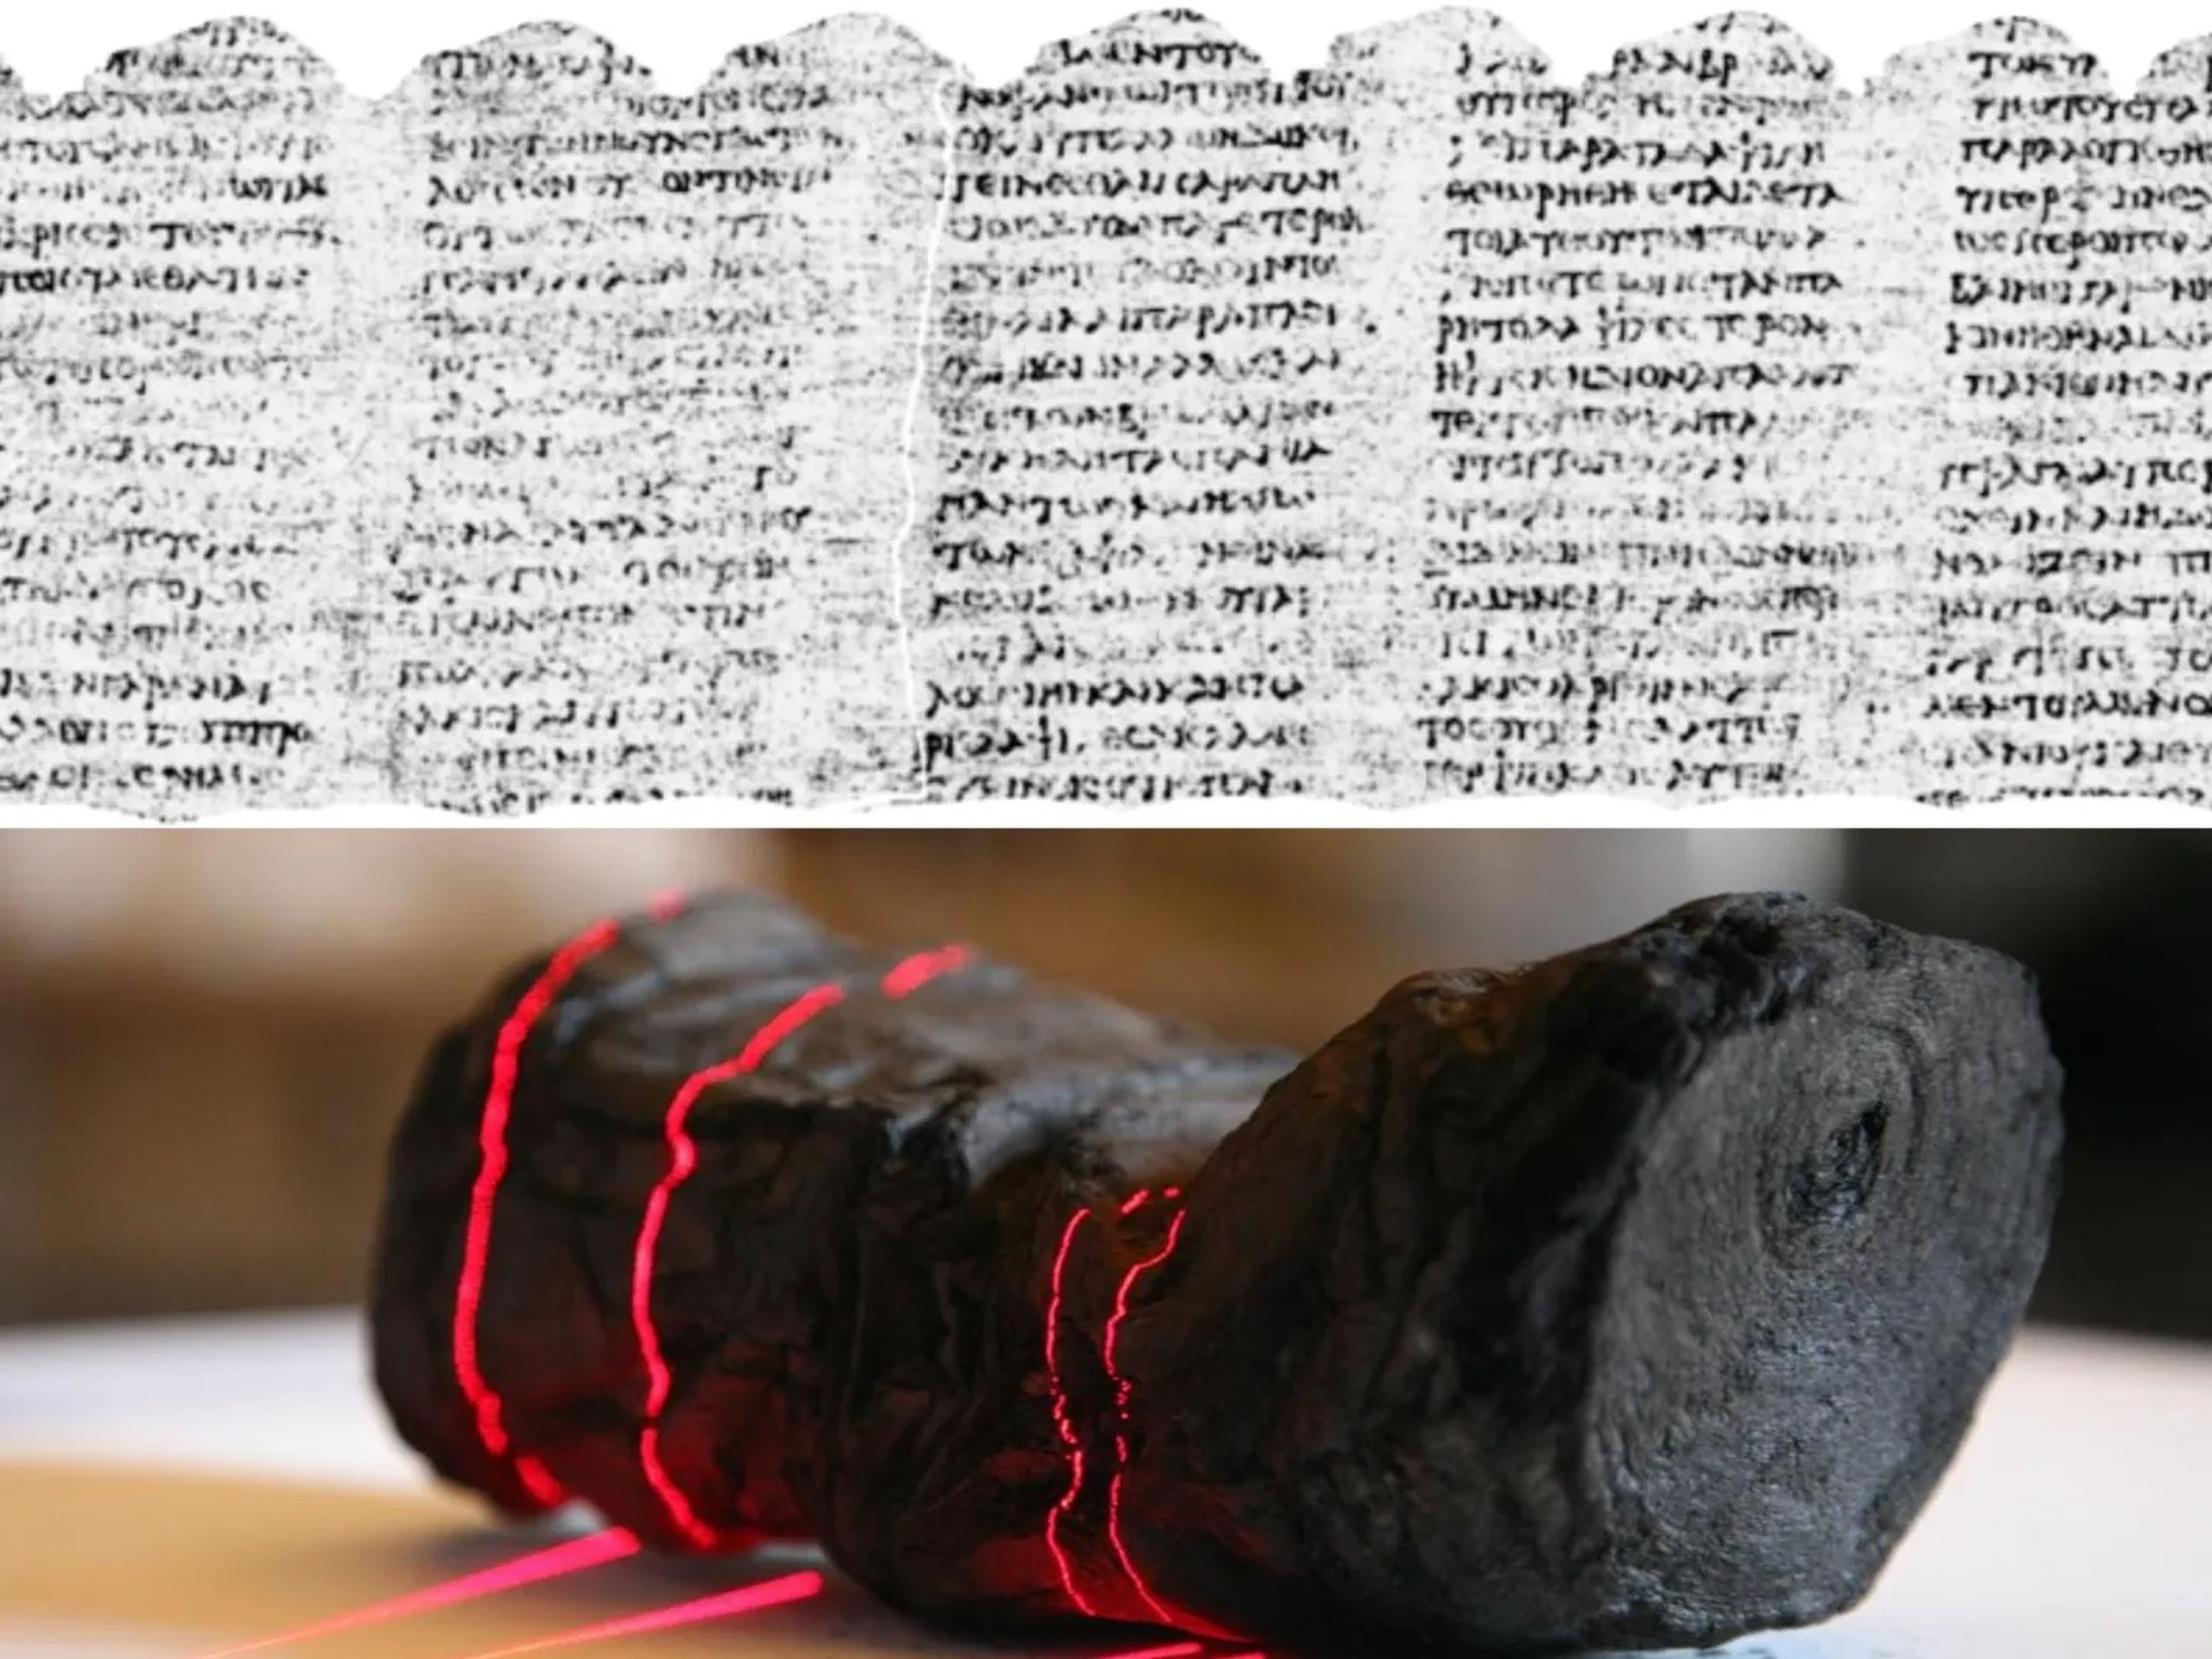 Greek words on a scanned image of papyrus and the charred scroll below it with red lines from an X-ray